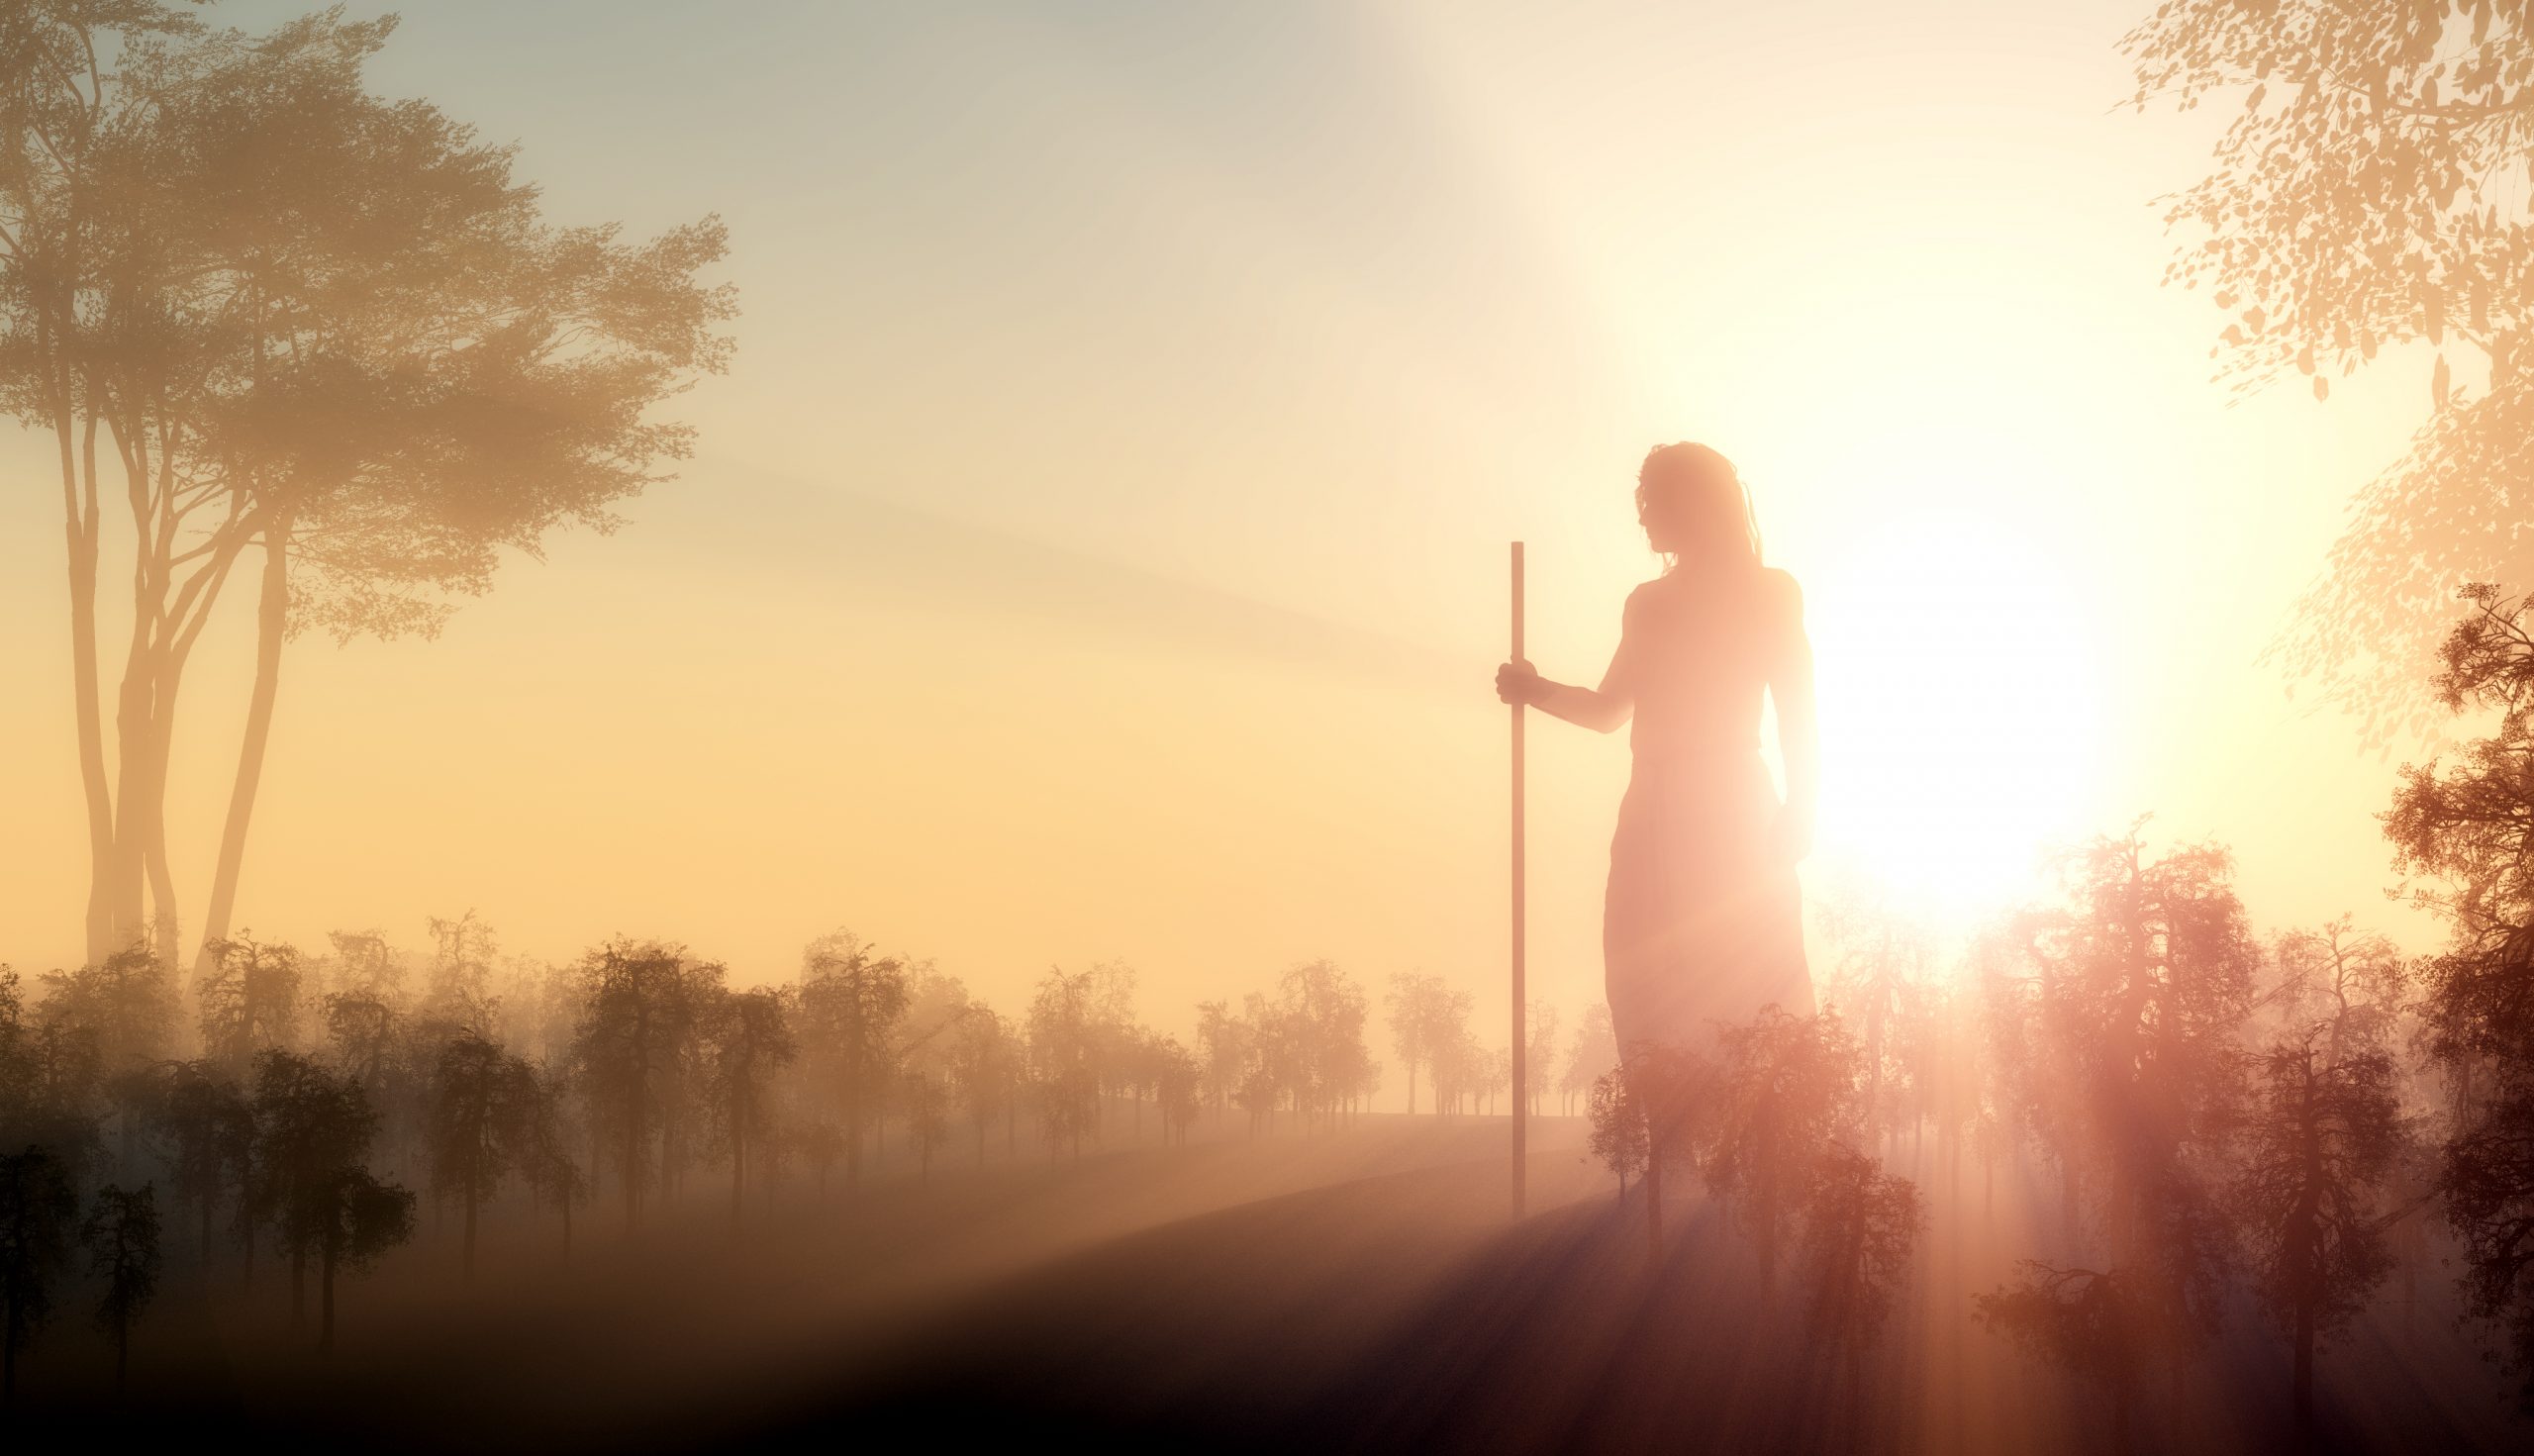 An artists rendering of a silhouette of Jesus in the sunlight. Depositphotos.